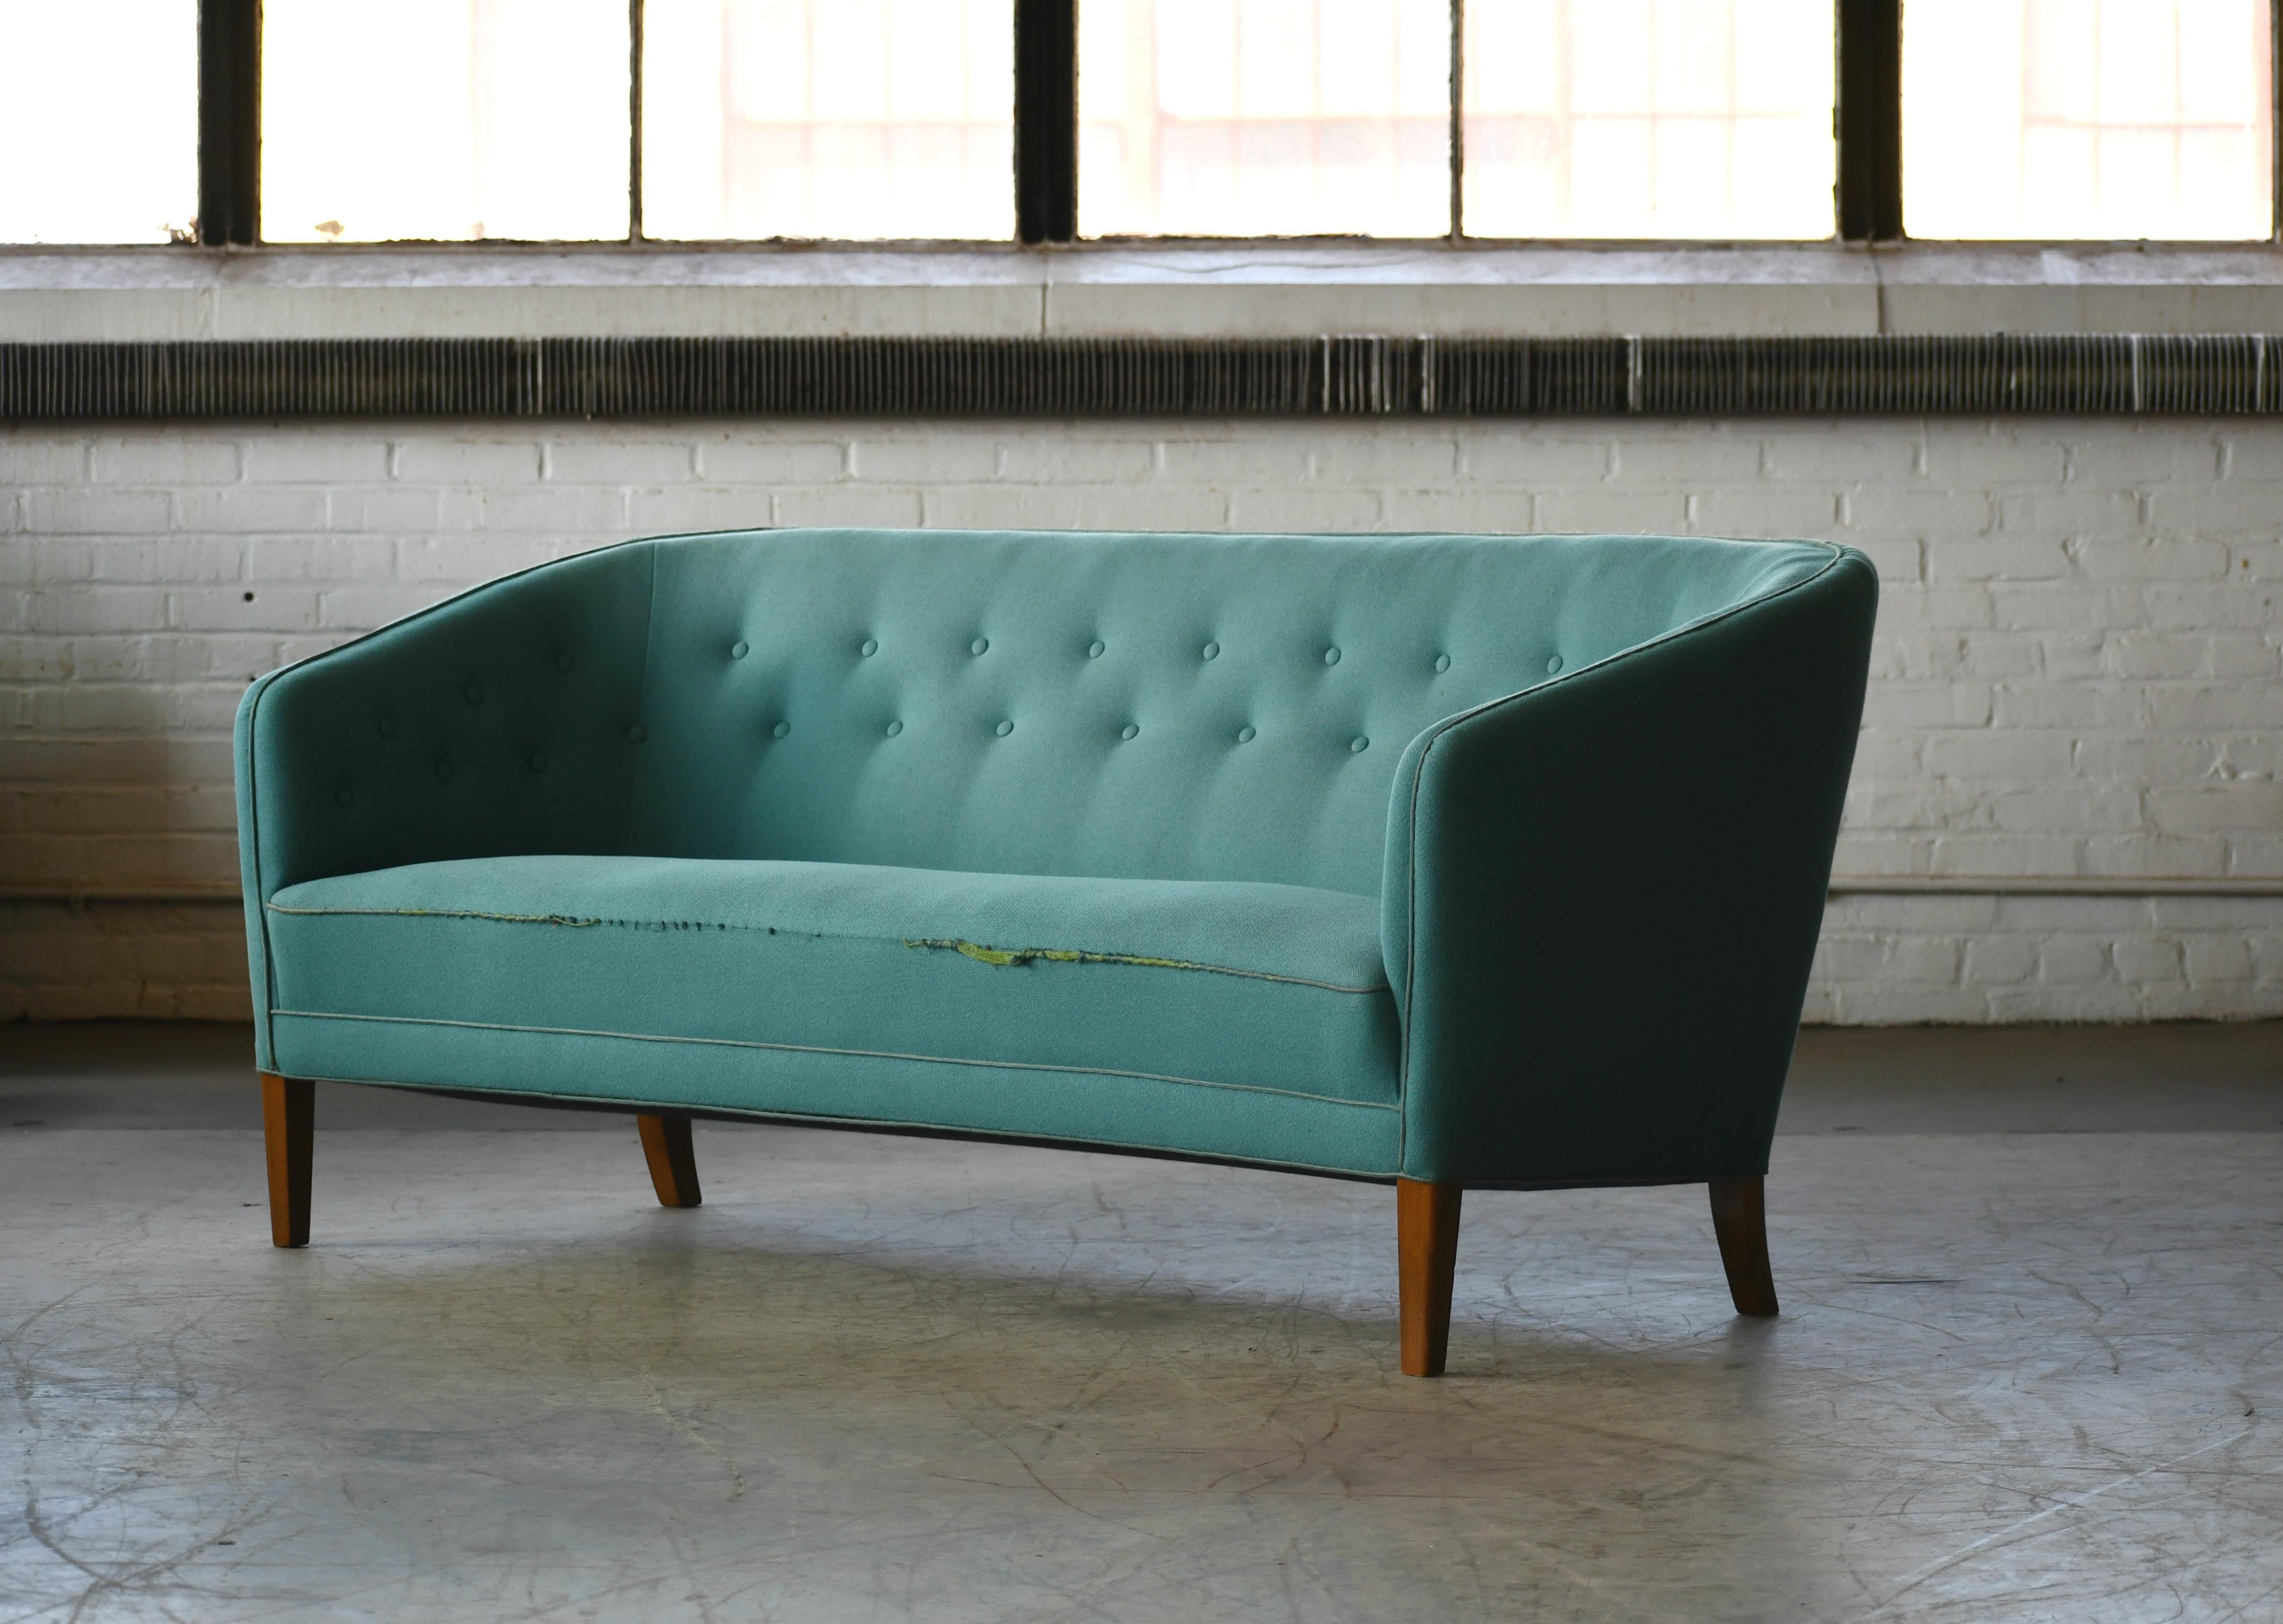 Beautiful sought after three-seat sofa by Ludvig Pontoppidan made in Denmark probably between late 1940s and 1950. The design is a classic Pontoppidan with slim elegant scoop-like lines and a very modern look way ahead of its time. The sofa is solid